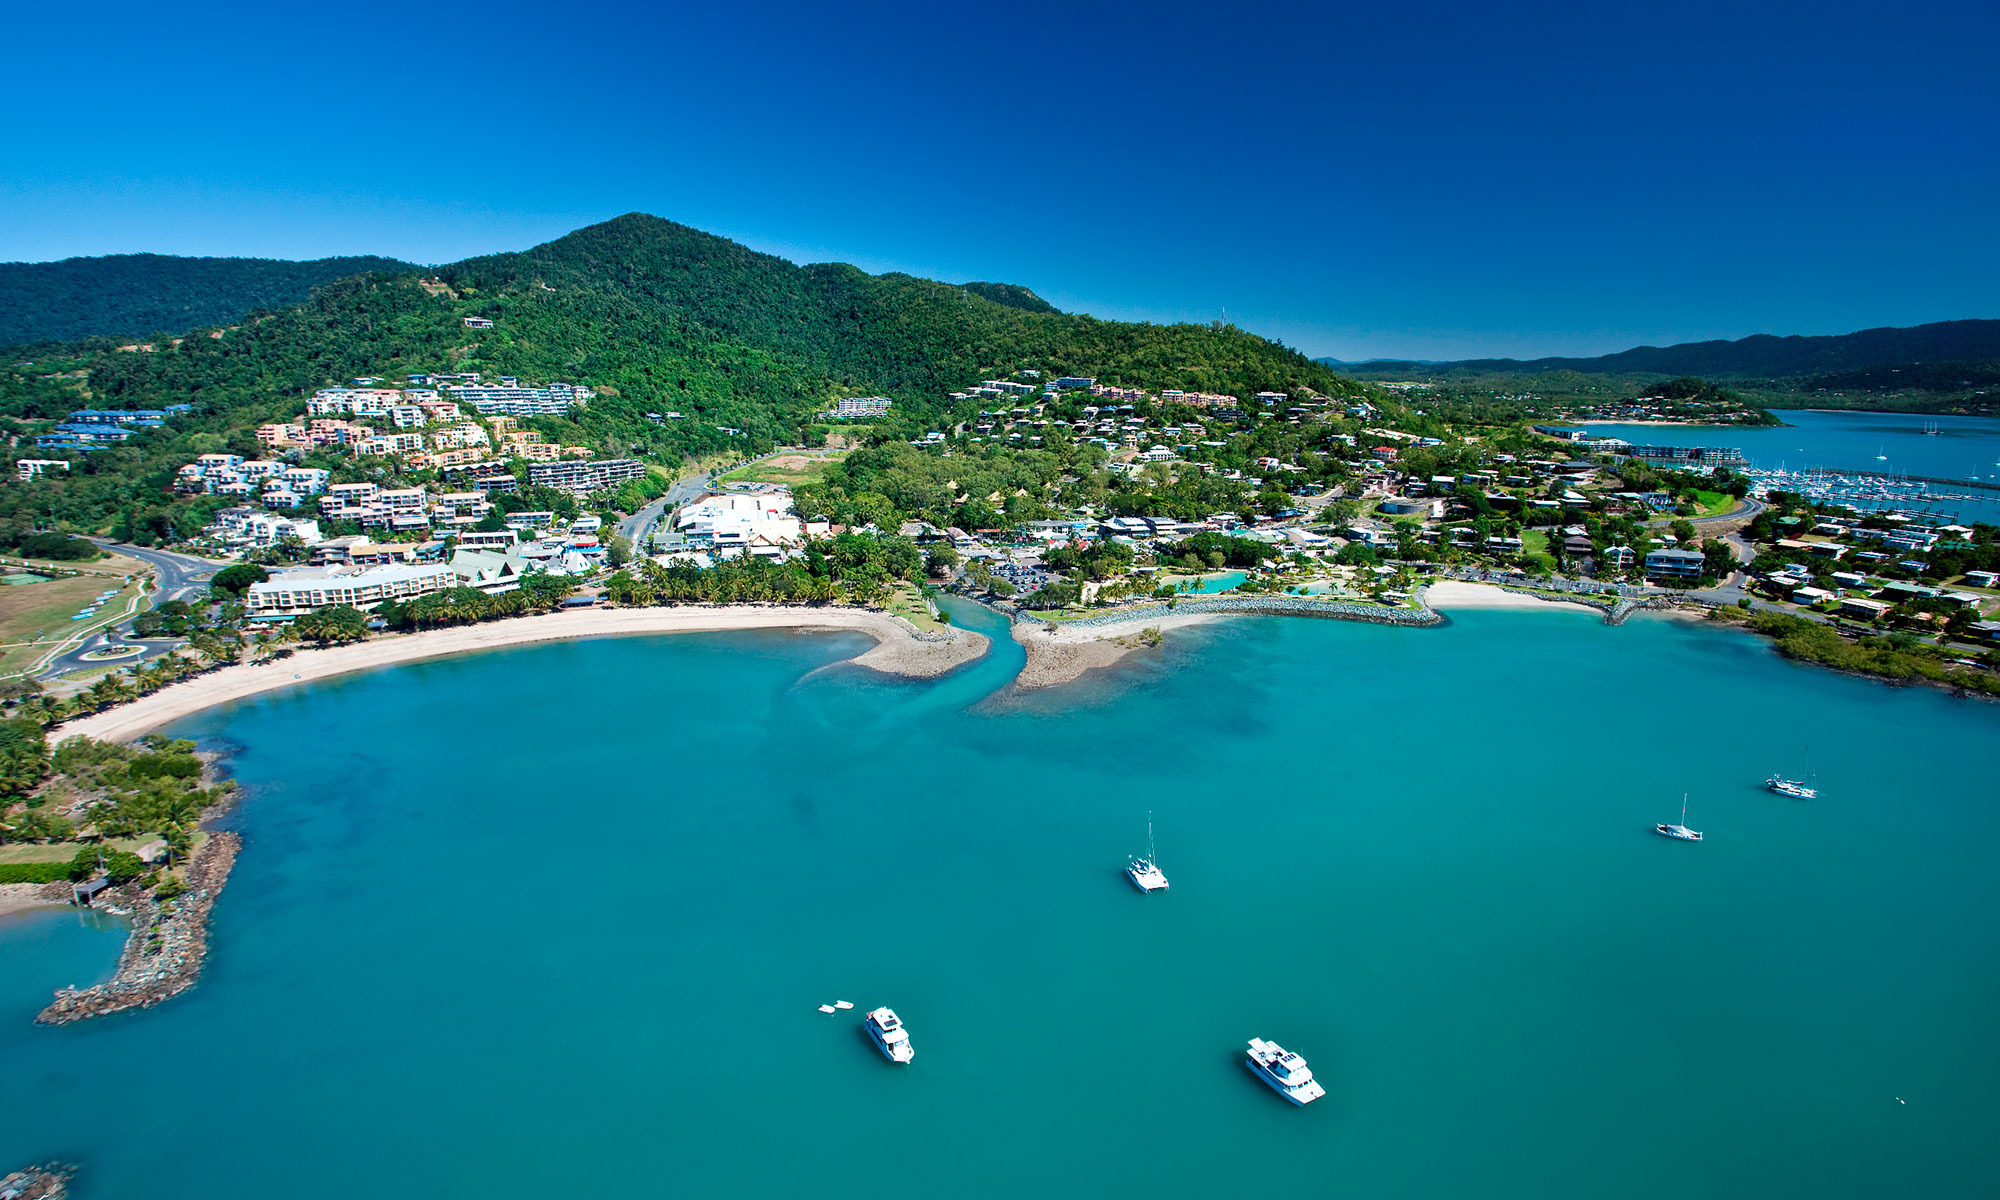 Whitsunday Green - 10mins from Airlie Beach - Gateway to the Whitsundays